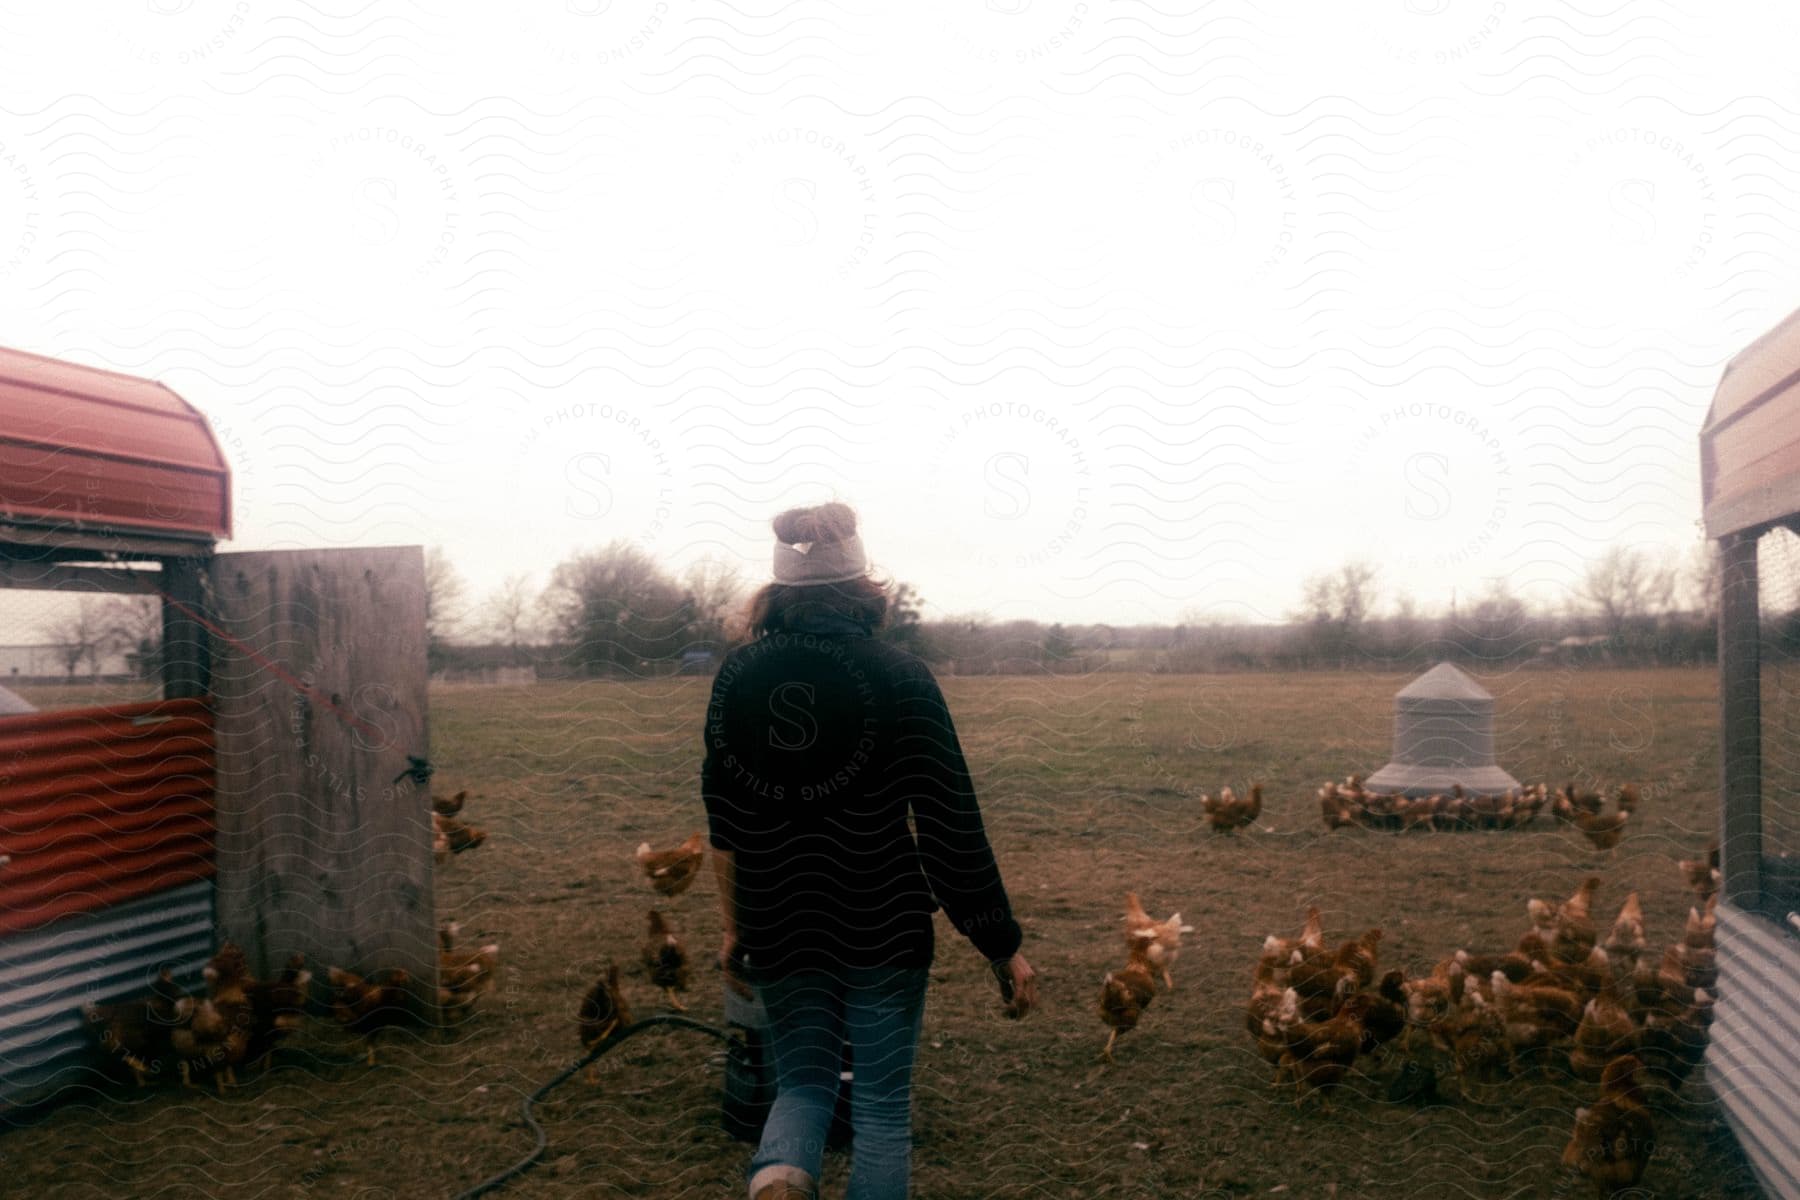 A farmer walks into a chicken yard surrounded by chickens on a farm in austin tx